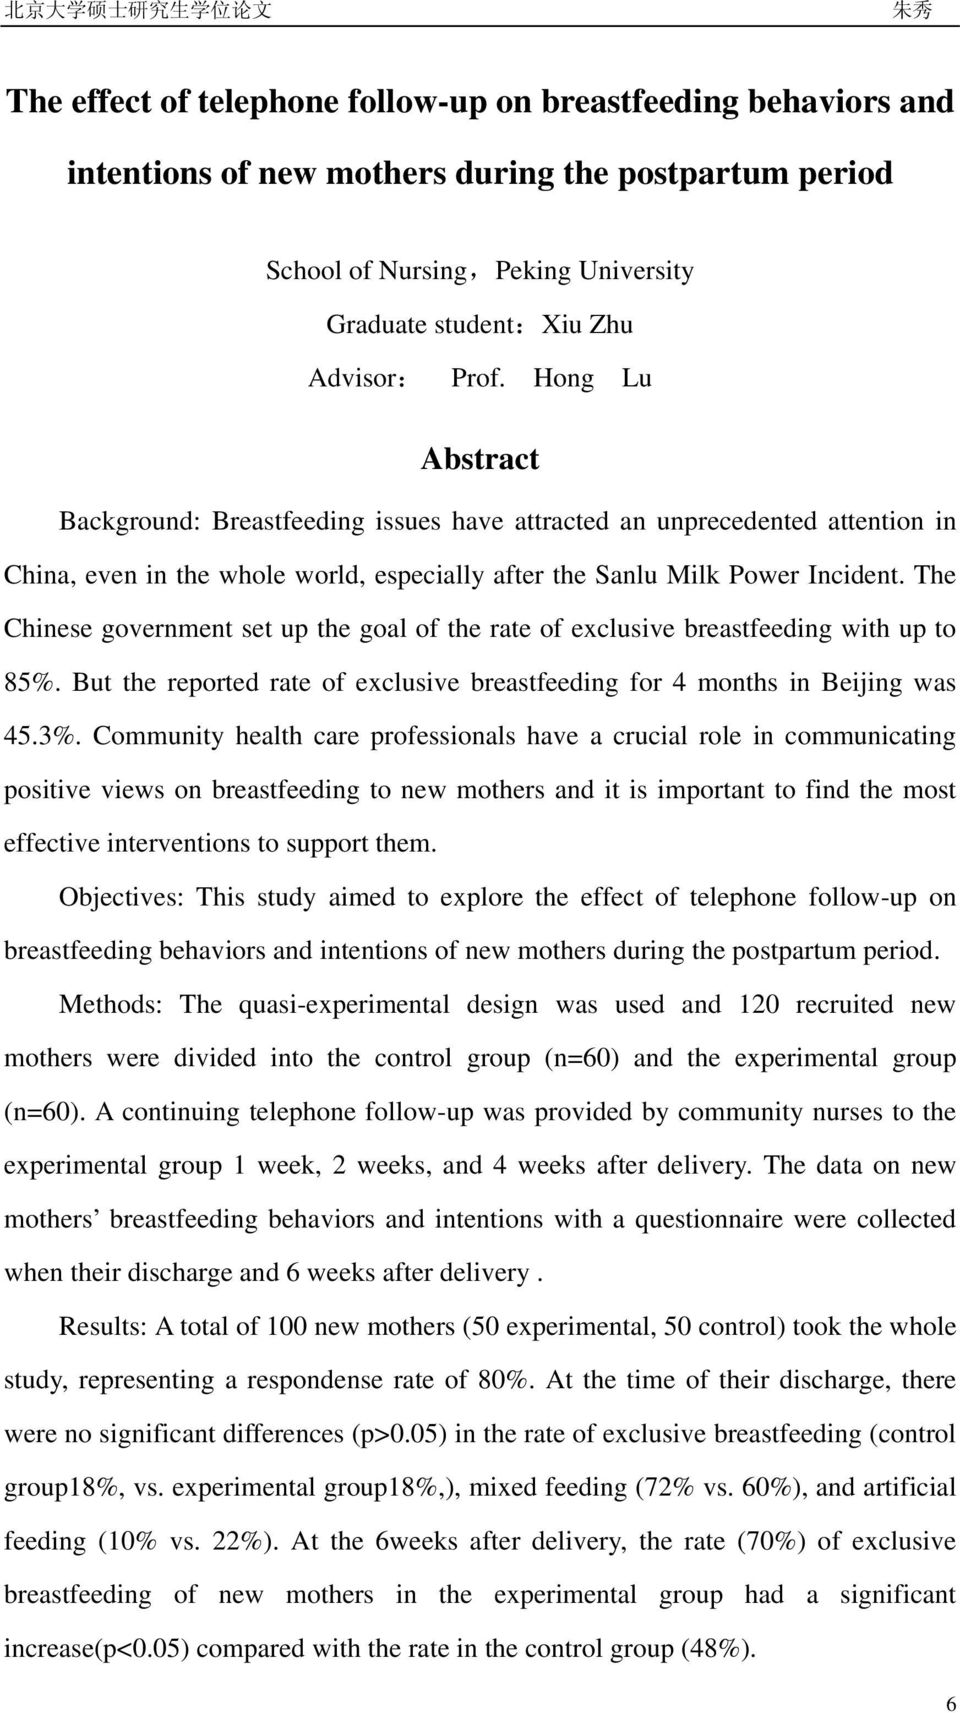 The Chinese government set up the goal of the rate of exclusive breastfeeding with up to 85%. But the reported rate of exclusive breastfeeding for 4 months in Beijing was 45.3%.